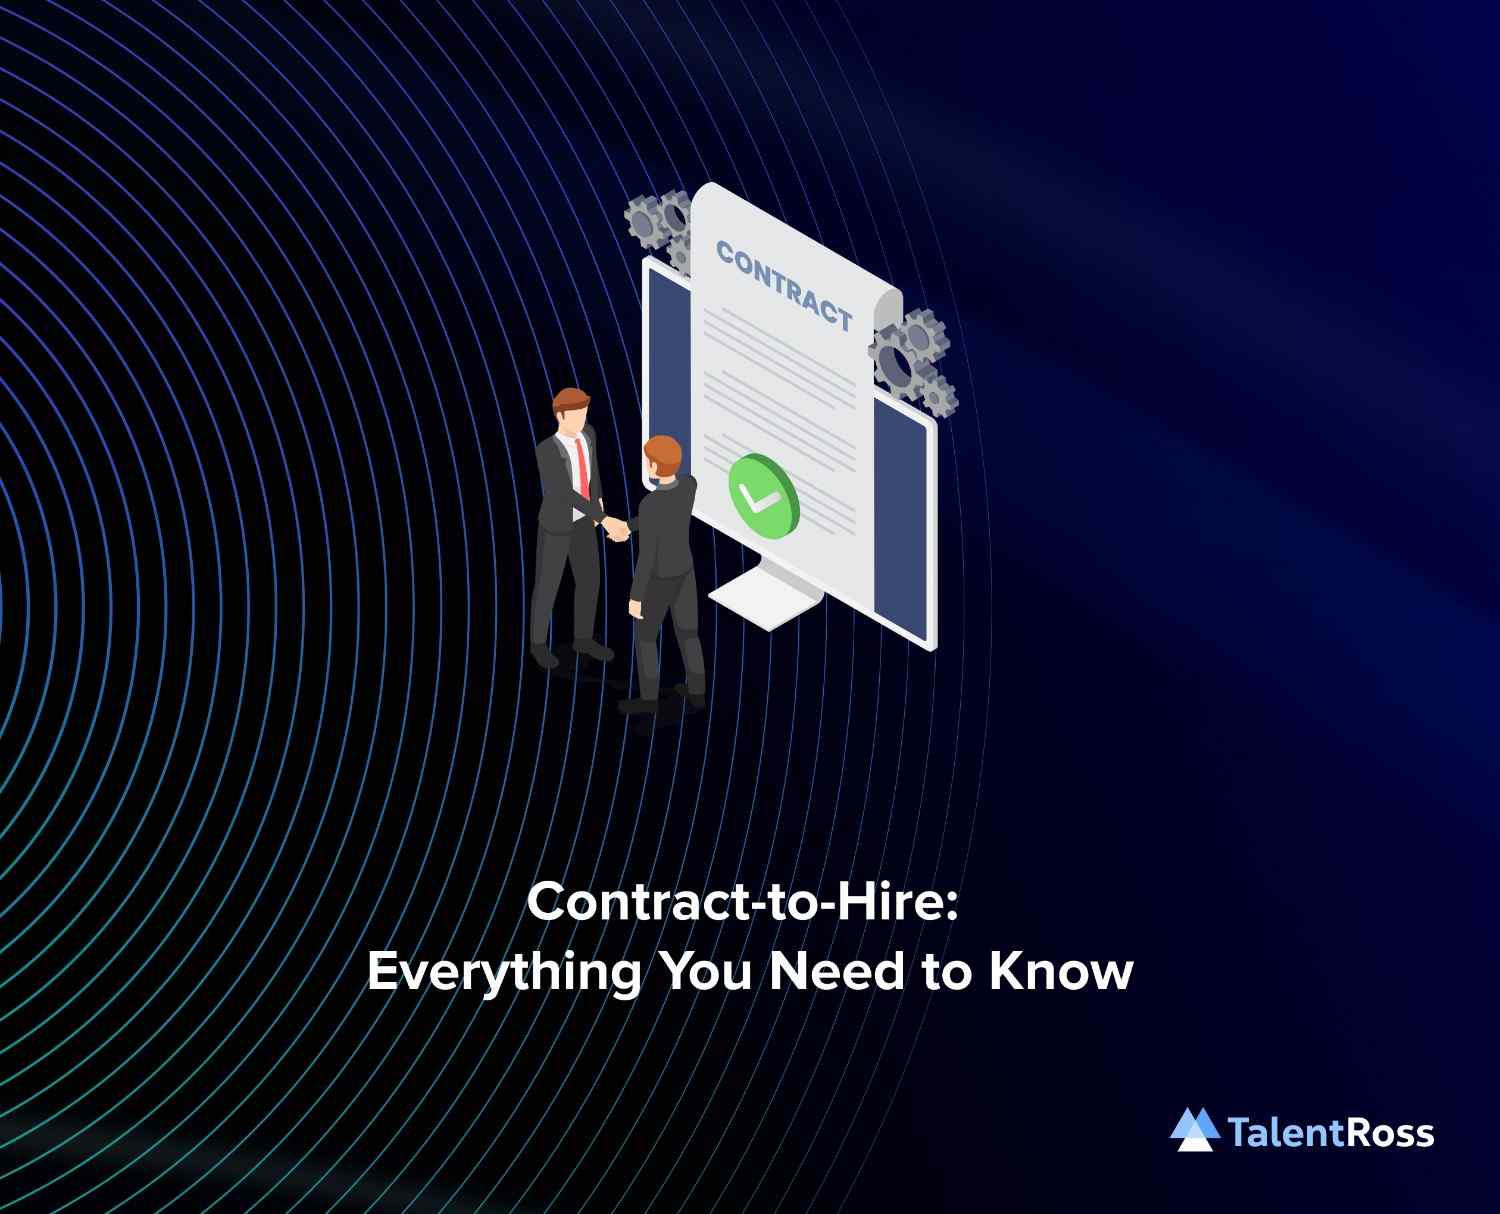 Contract-to-Hire: Everything You Need to Know